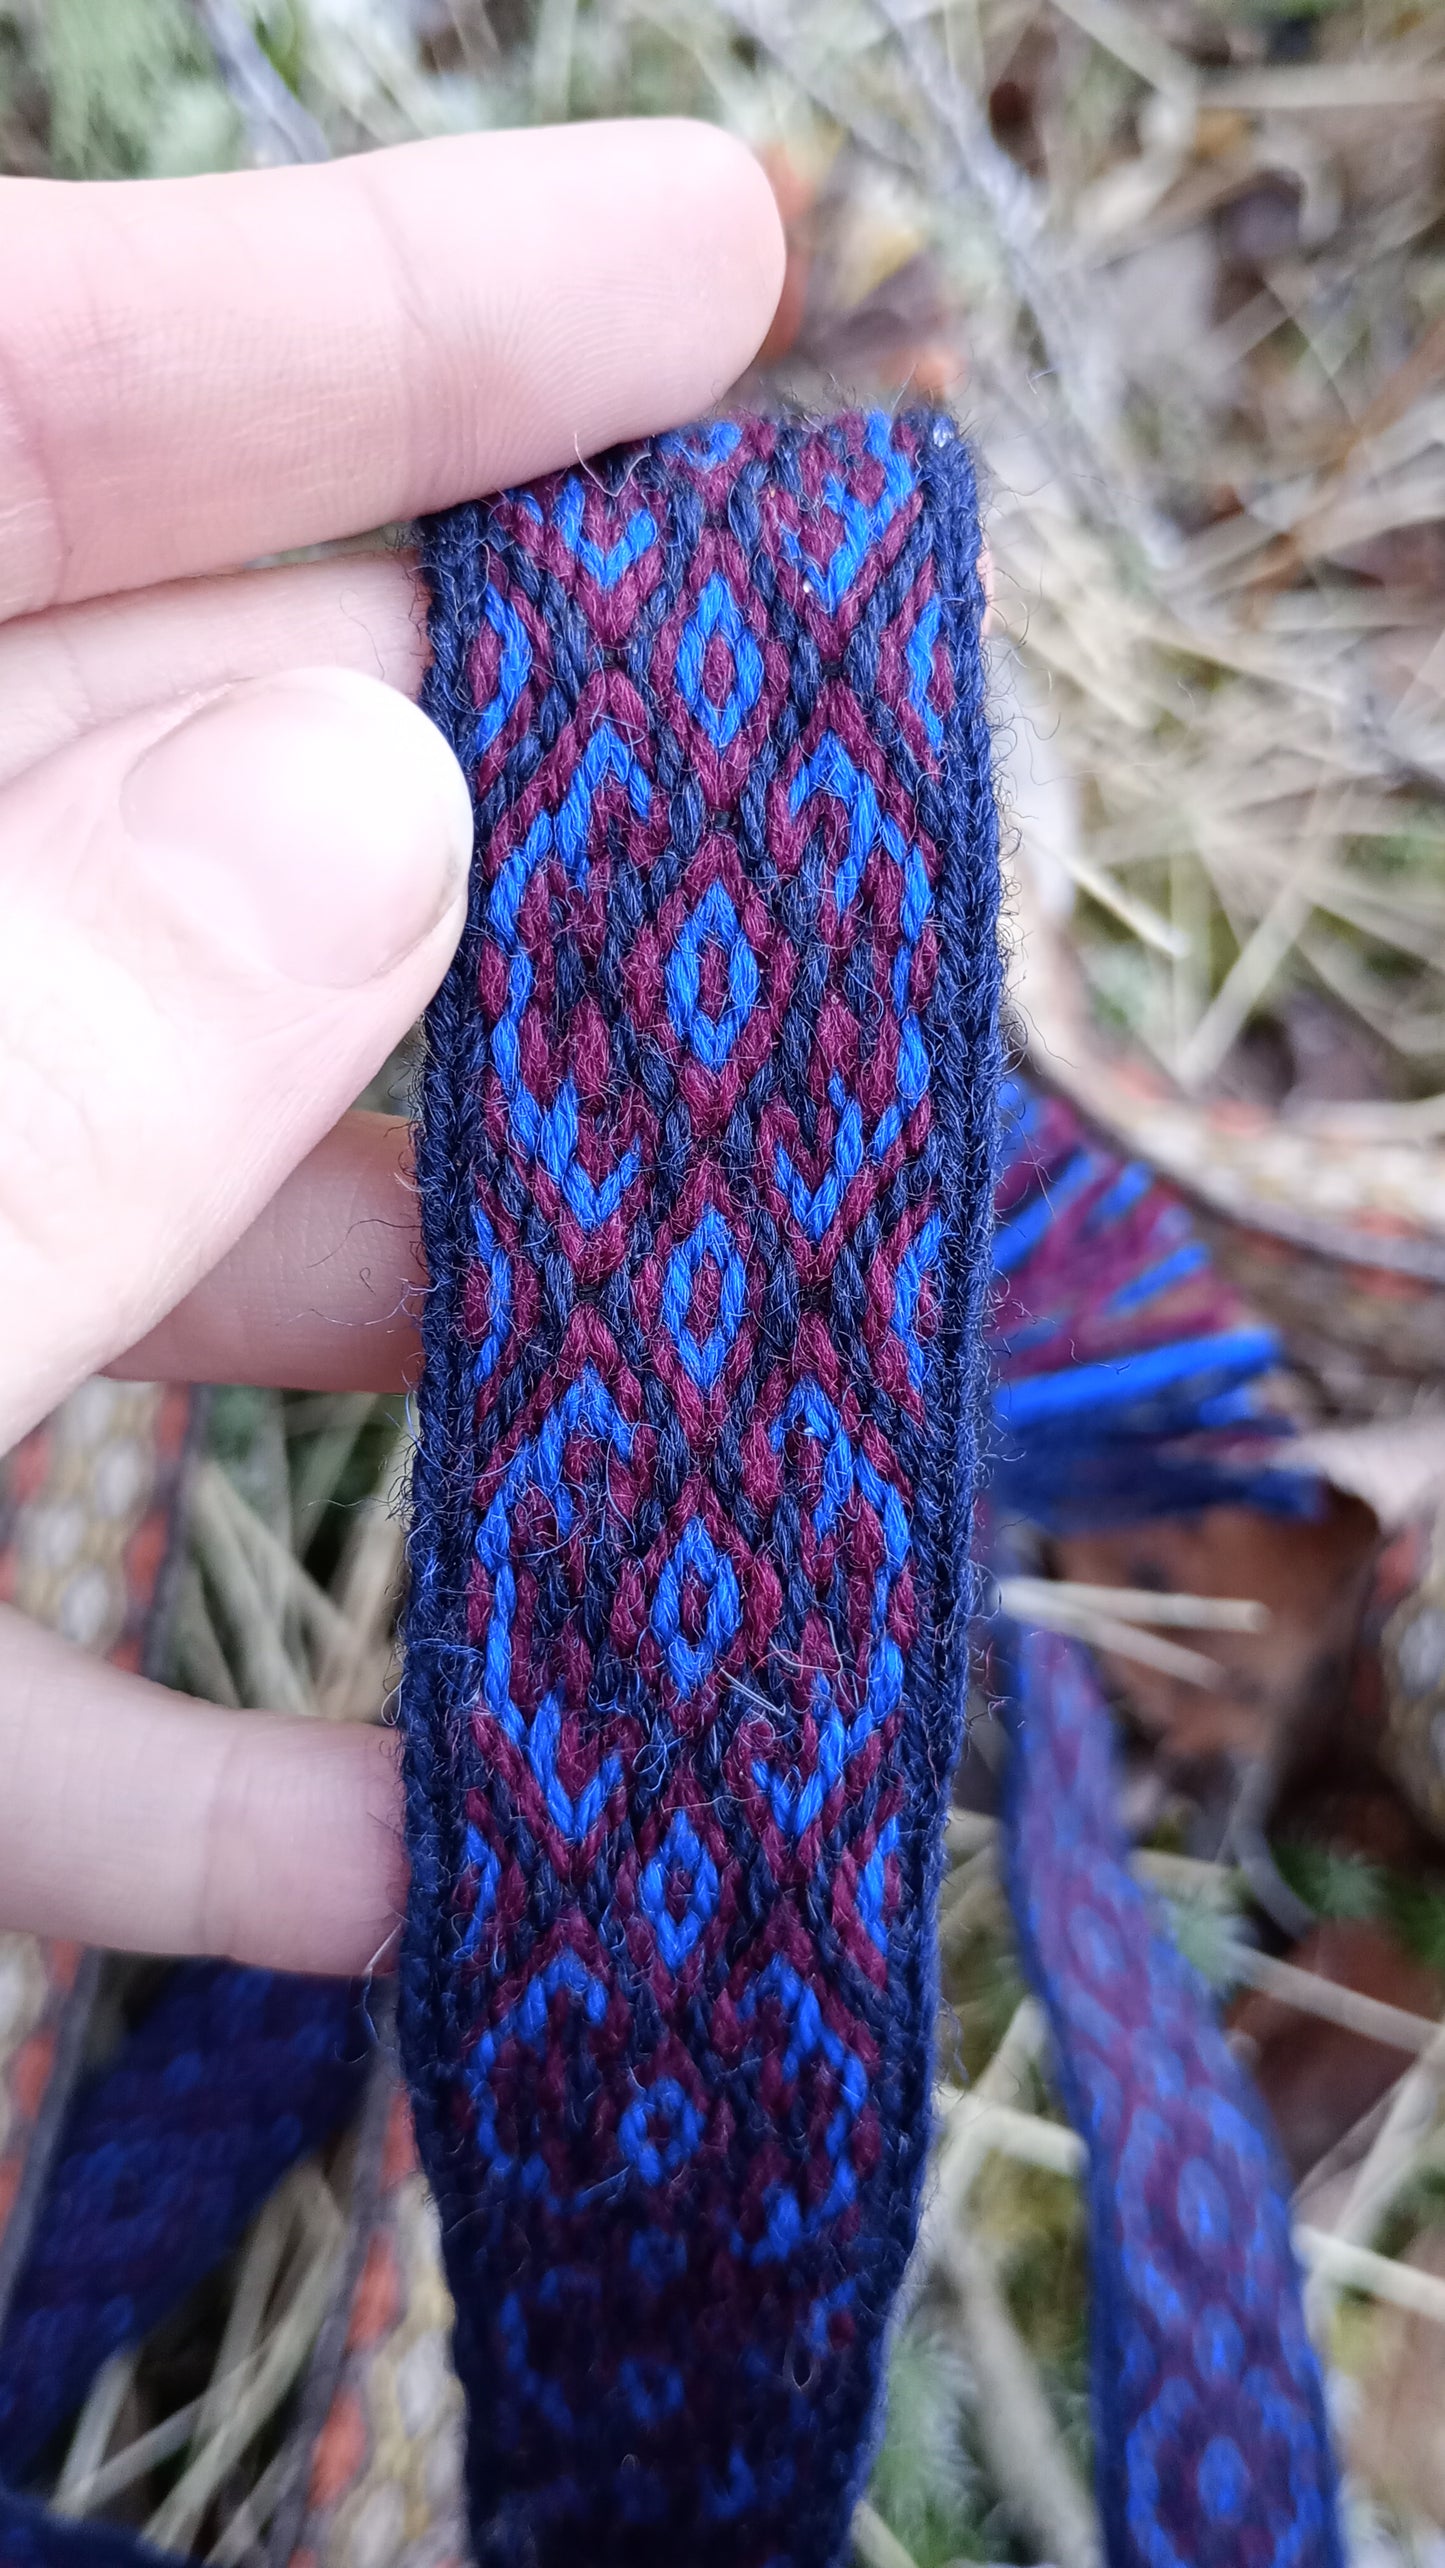 Belt in bright blue and purple